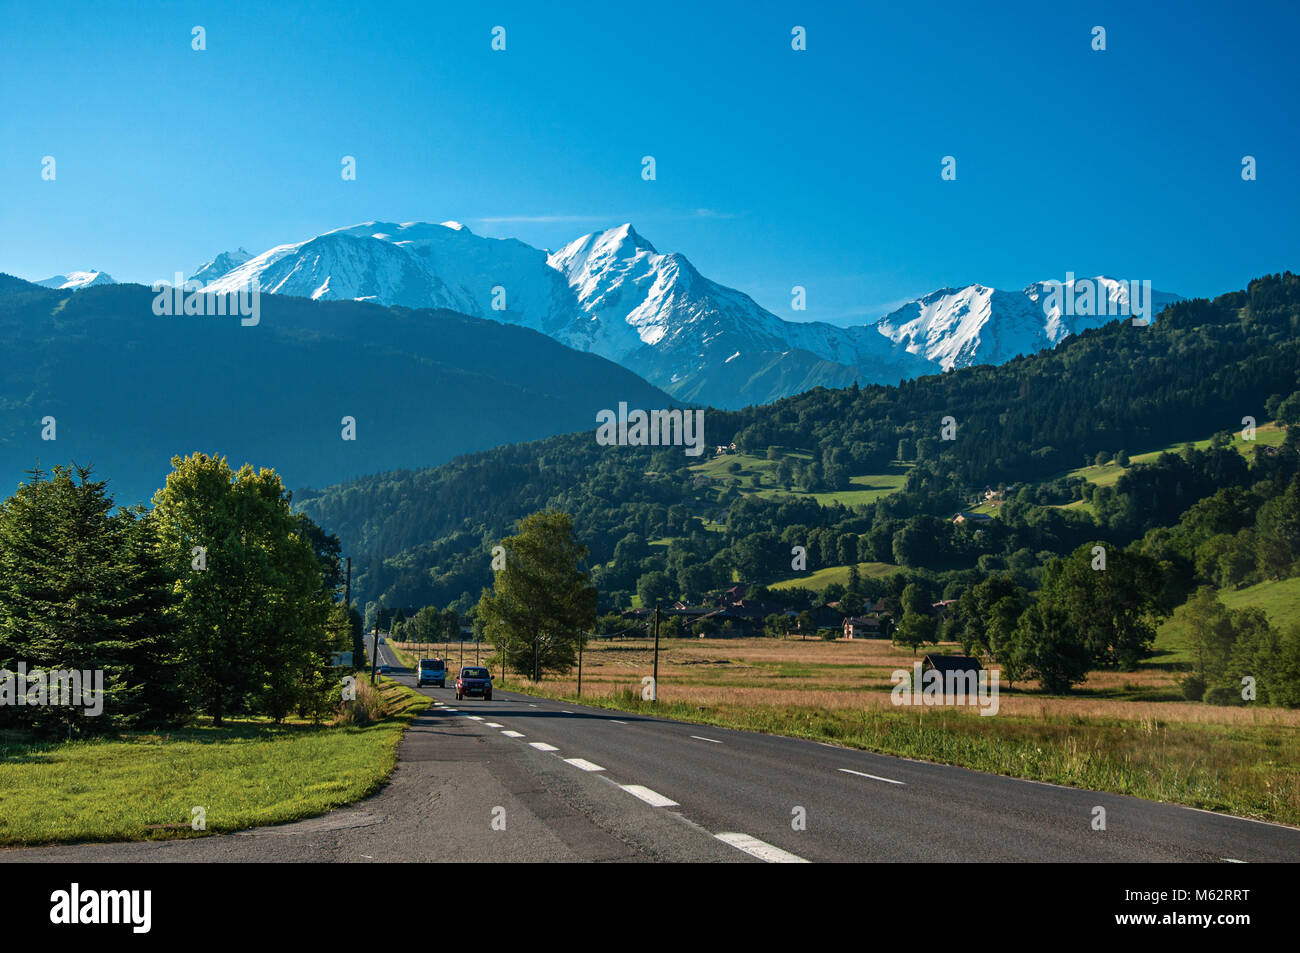 Road among fields, green forest and alpine landscape near Saint-Gervais-Les-Bains. A famous ski resort located near the Mont Blanc in the French Alps. Stock Photo